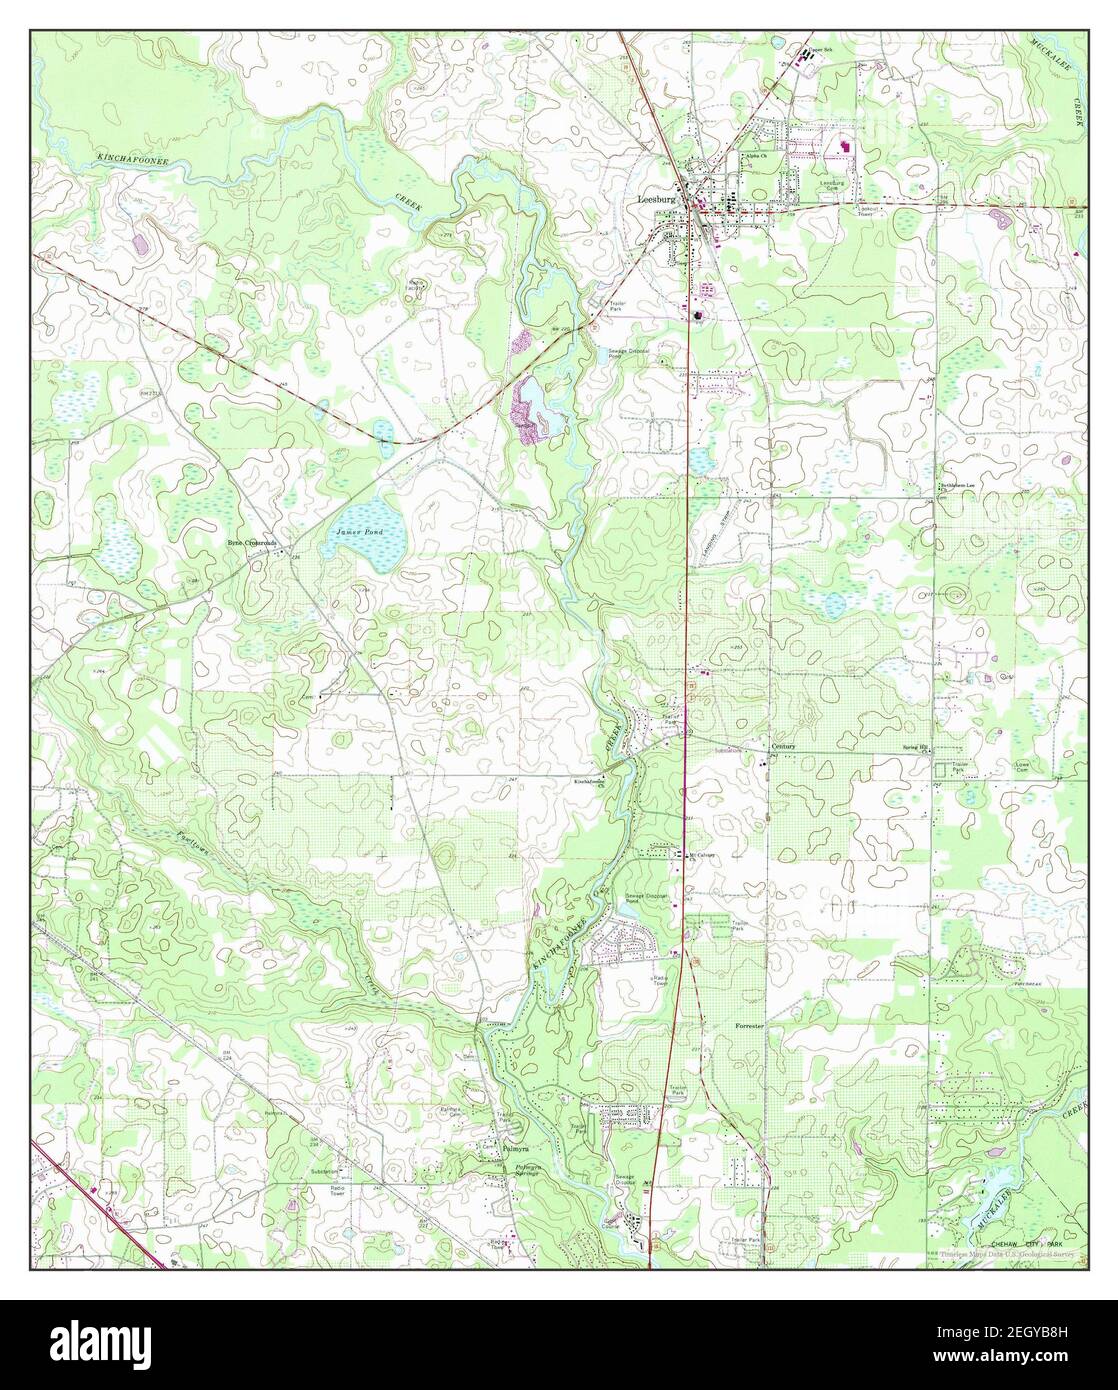 Leesburg, Georgia, map 1973, 1:24000, United States of America by Timeless Maps, data U.S. Geological Survey Stock Photo